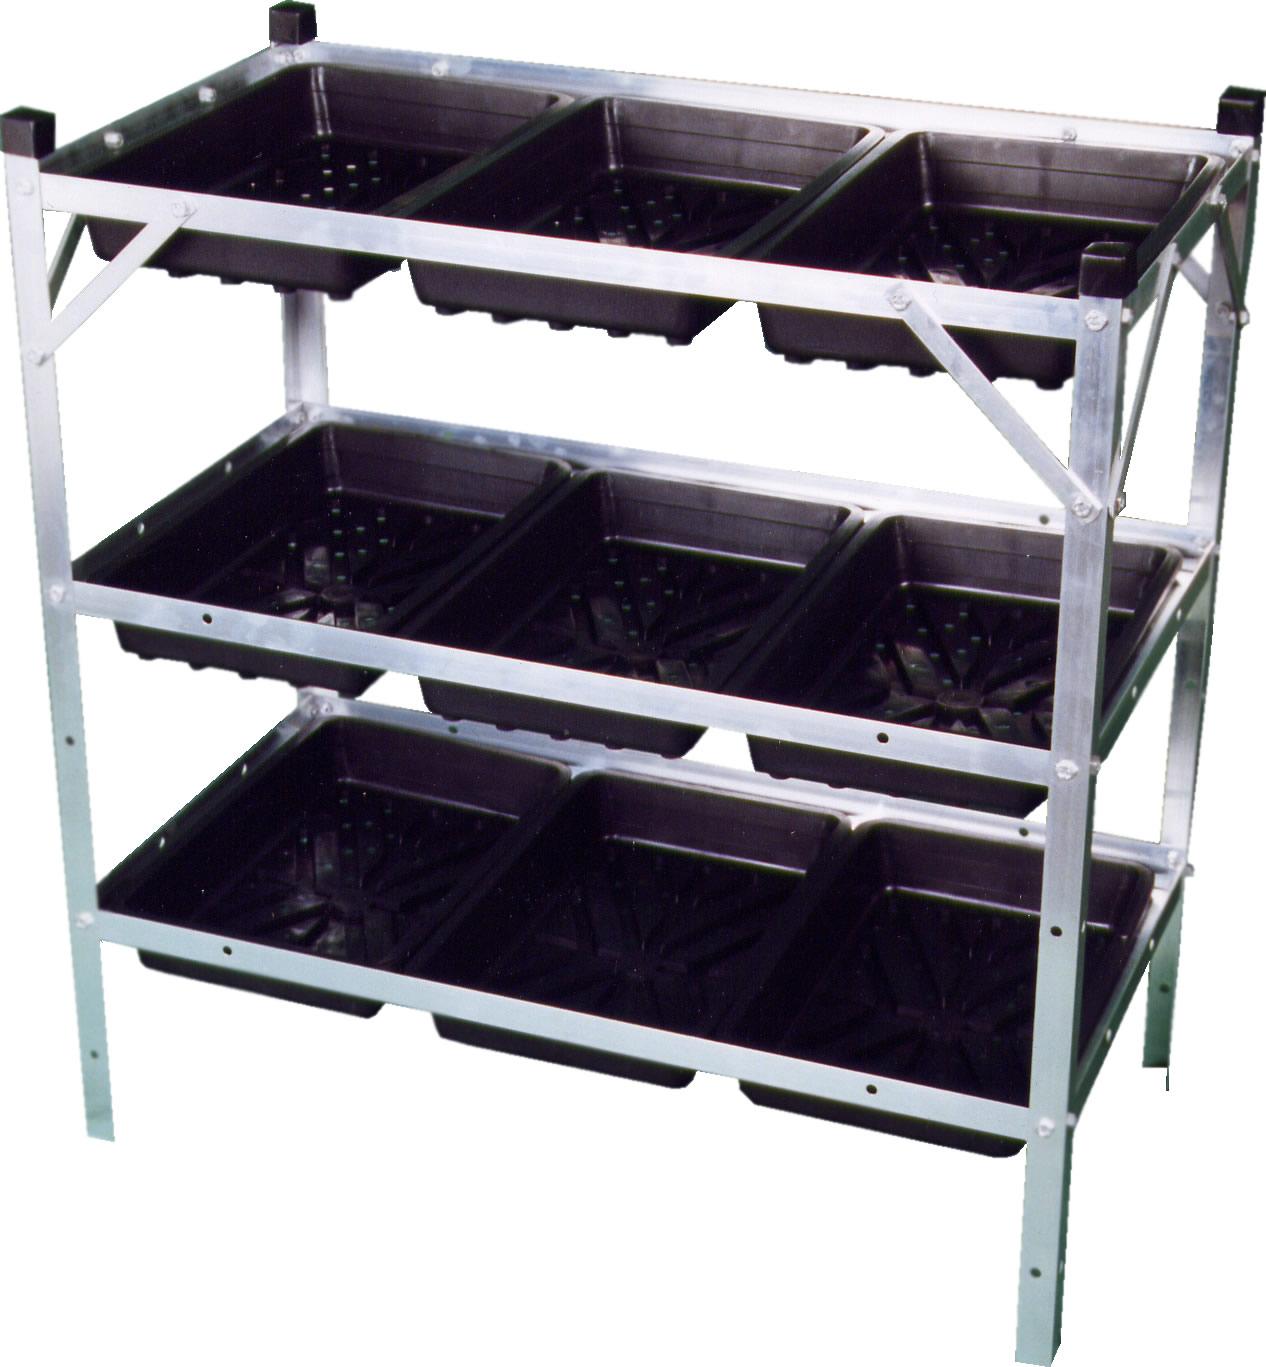 Seed Tray Unit x 12 Seed Trays Tibshelf Garden Products Ltd Greenhouse Staging